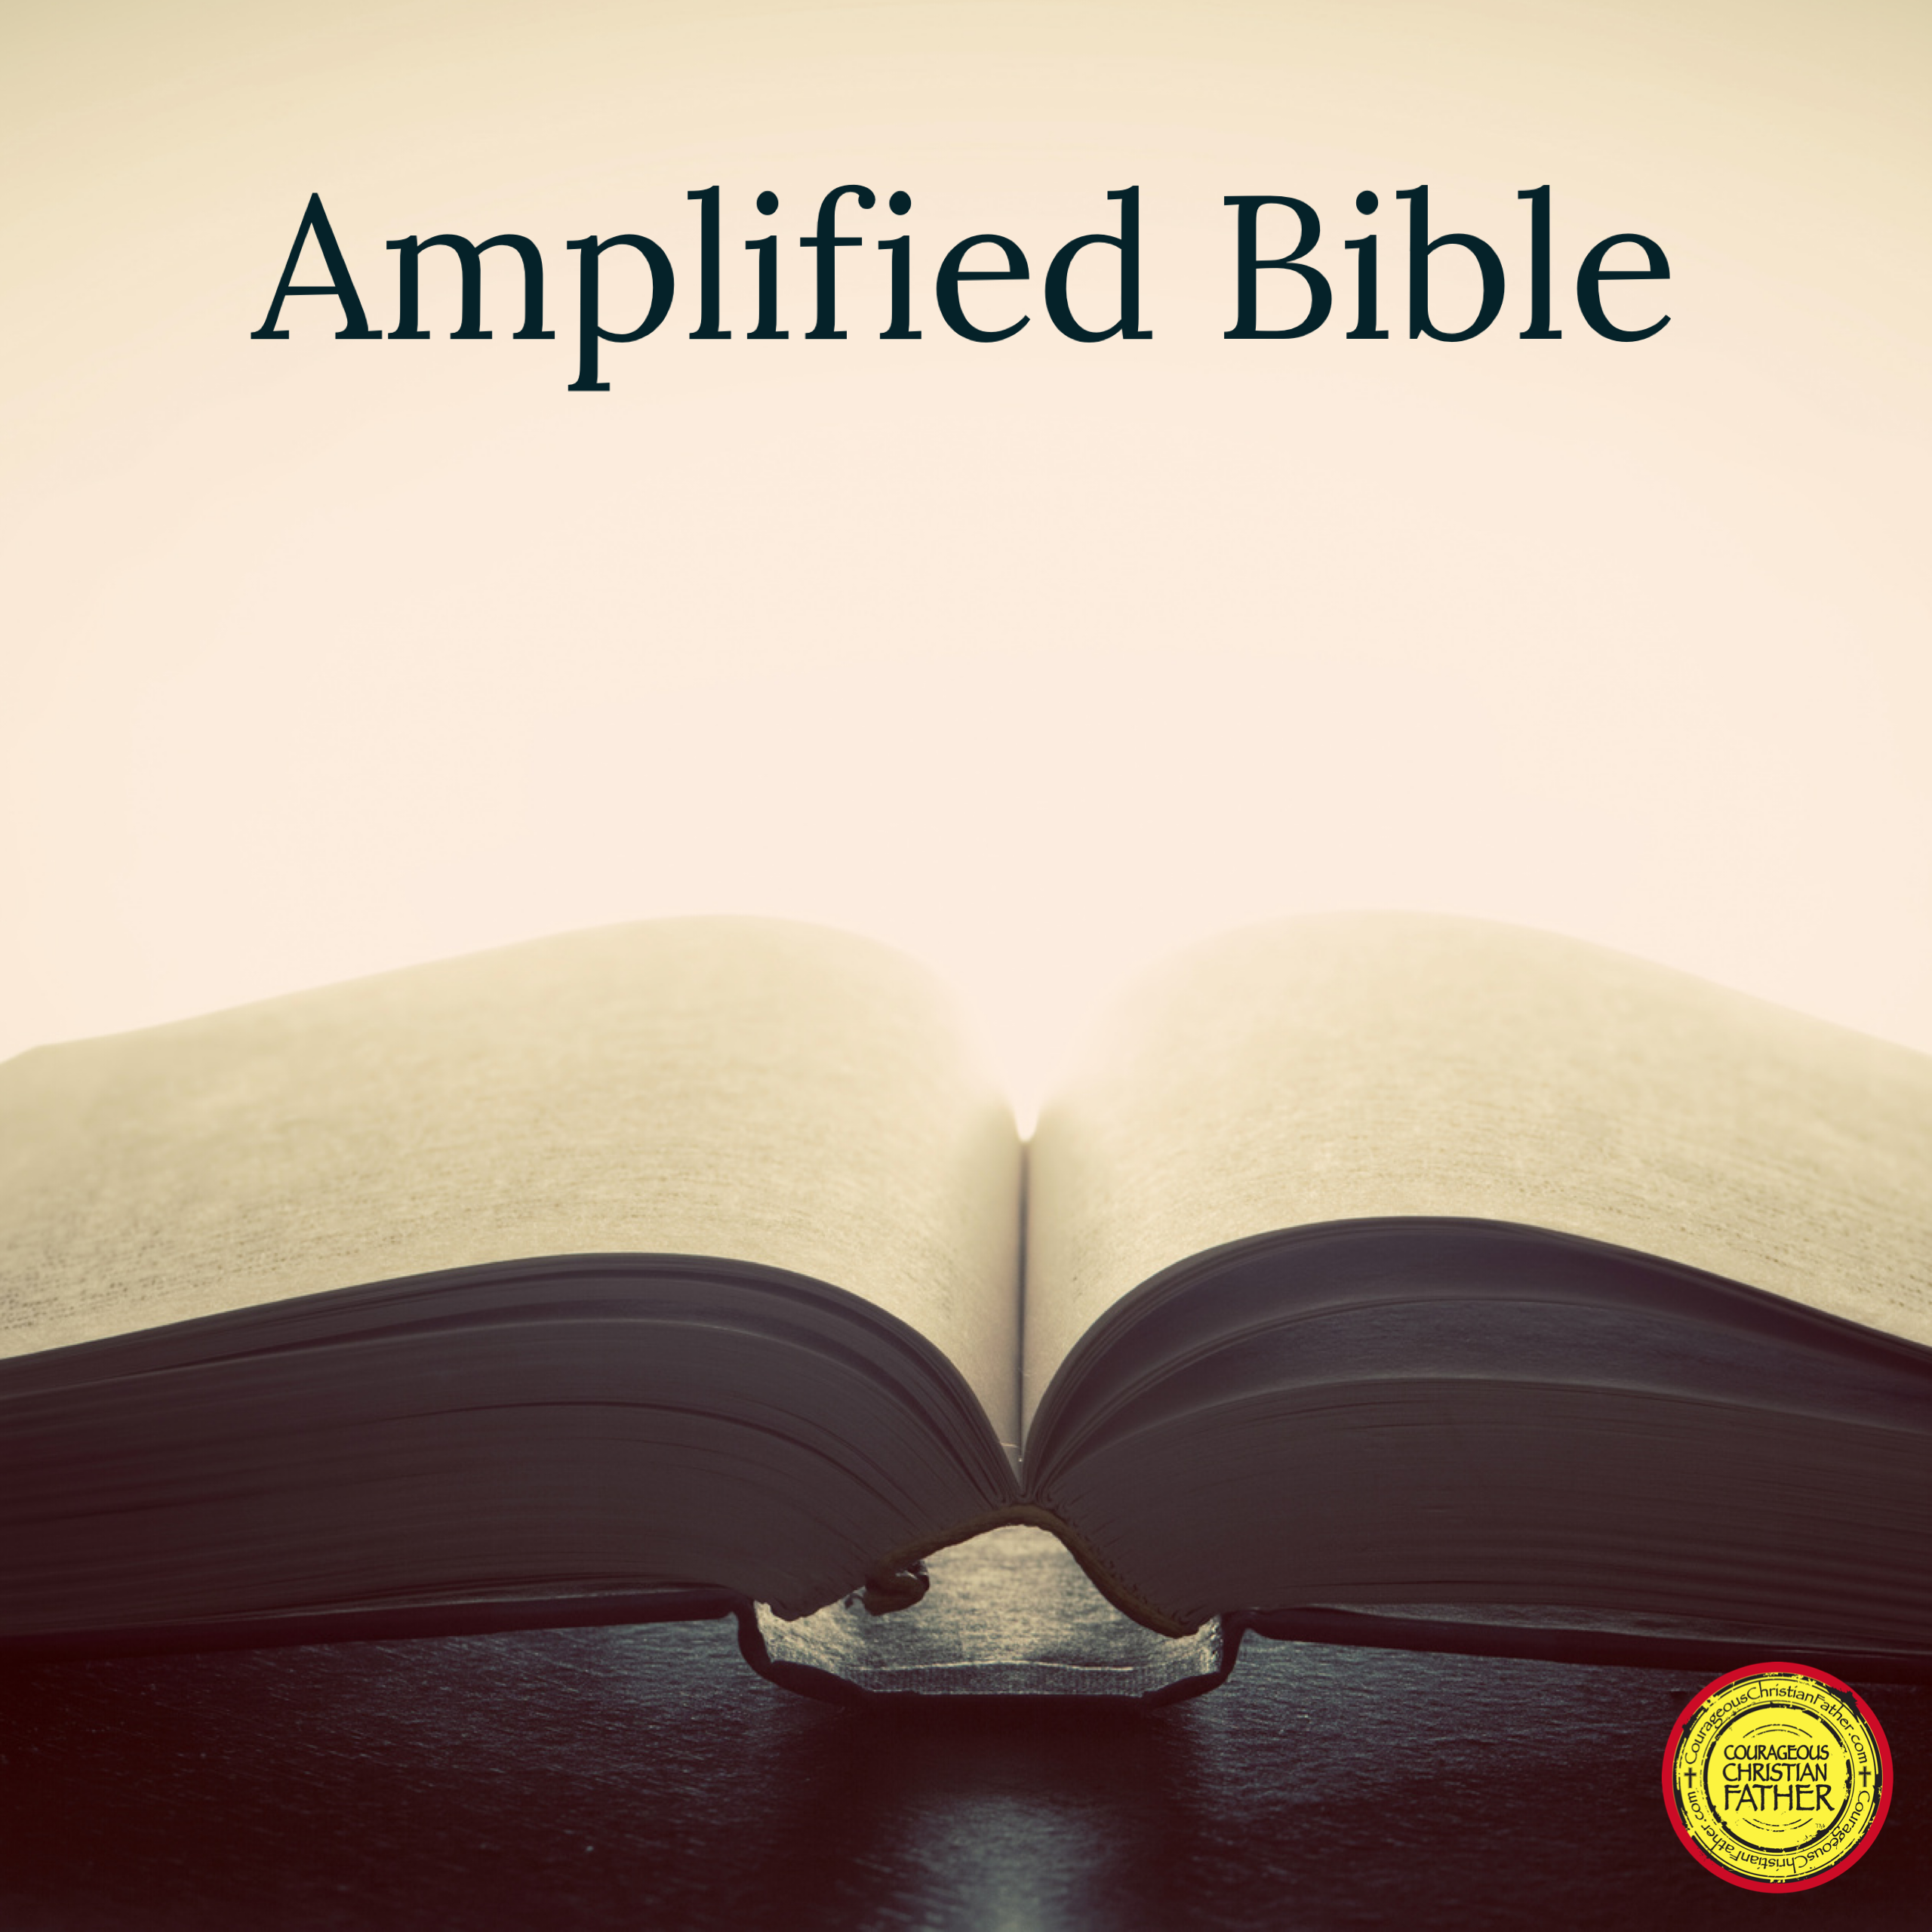 The Amplified Bible (AMP) is a translation of the Holy Bible that aims to enhance the understanding of the text by amplifying the meaning of words and phrases in the original languages. It was first published in 1965 by Zondervan Publishing House, and since then, it has become one of the most popular translations of the Bible worldwide. #AMP